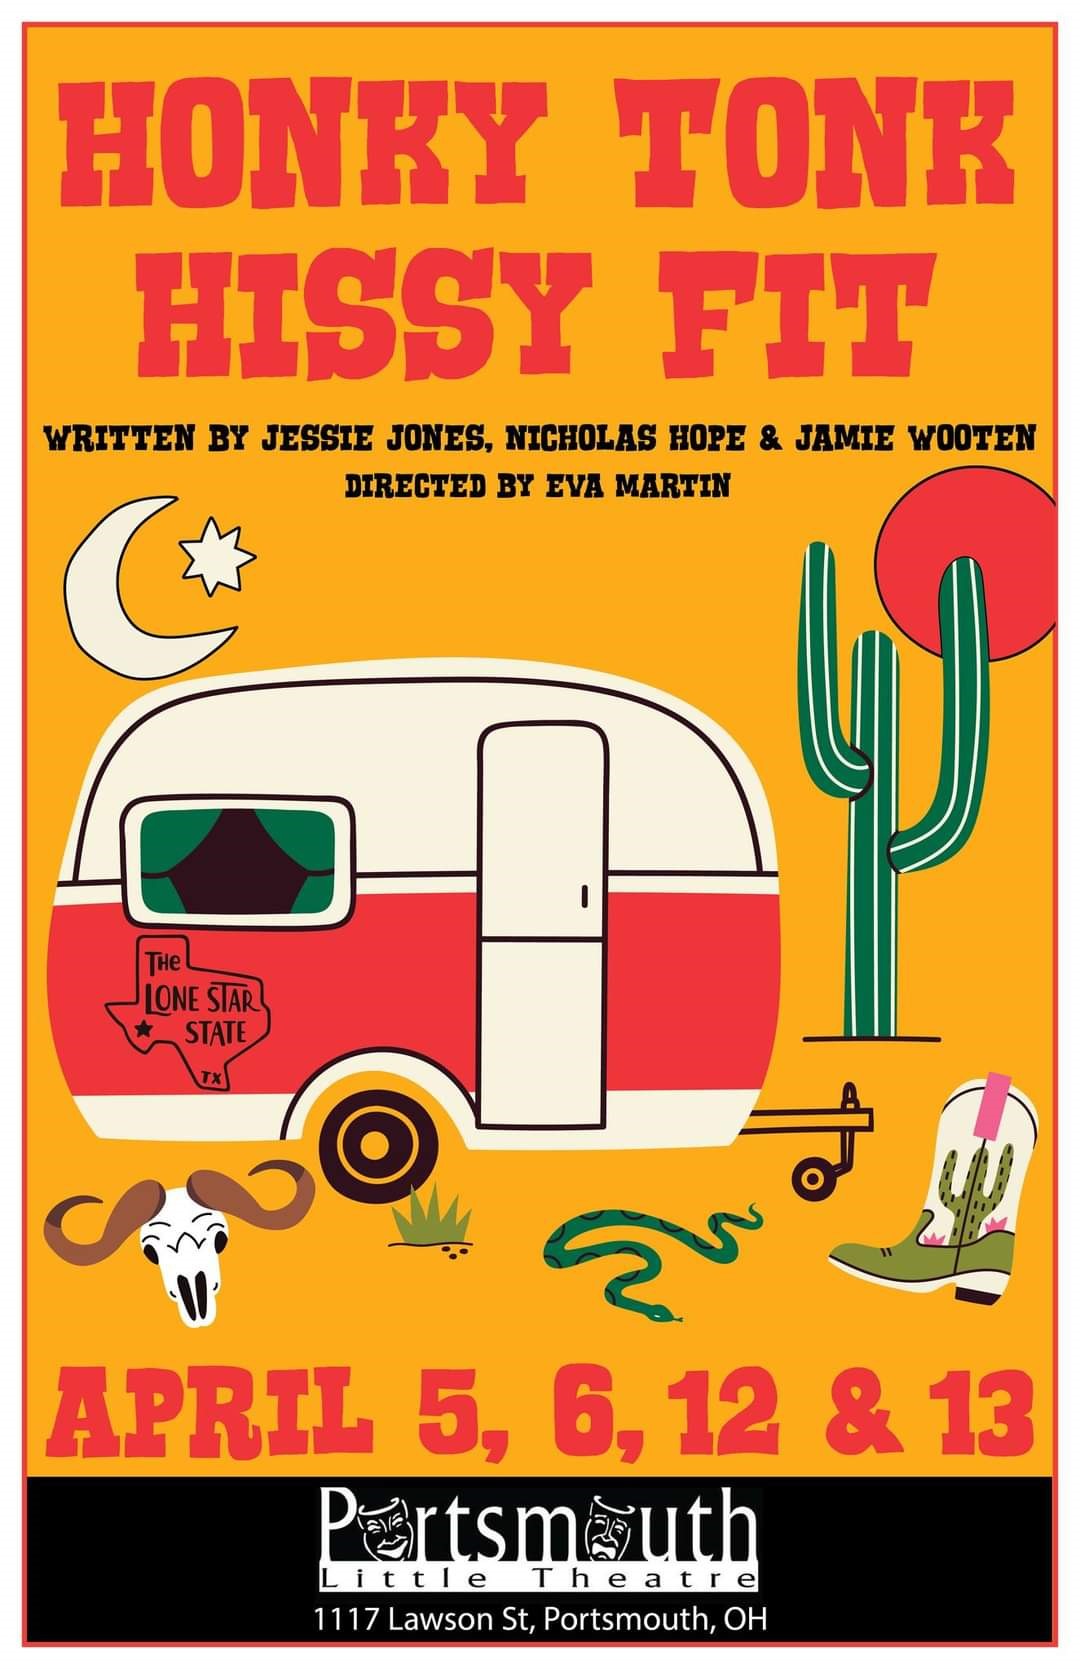 Honky Tonk Hissy Fit  on Apr 12, 19:30@Portsmouth Little Theatre - Pick a seat, Buy tickets and Get information on Portsmouth Little Theatre 